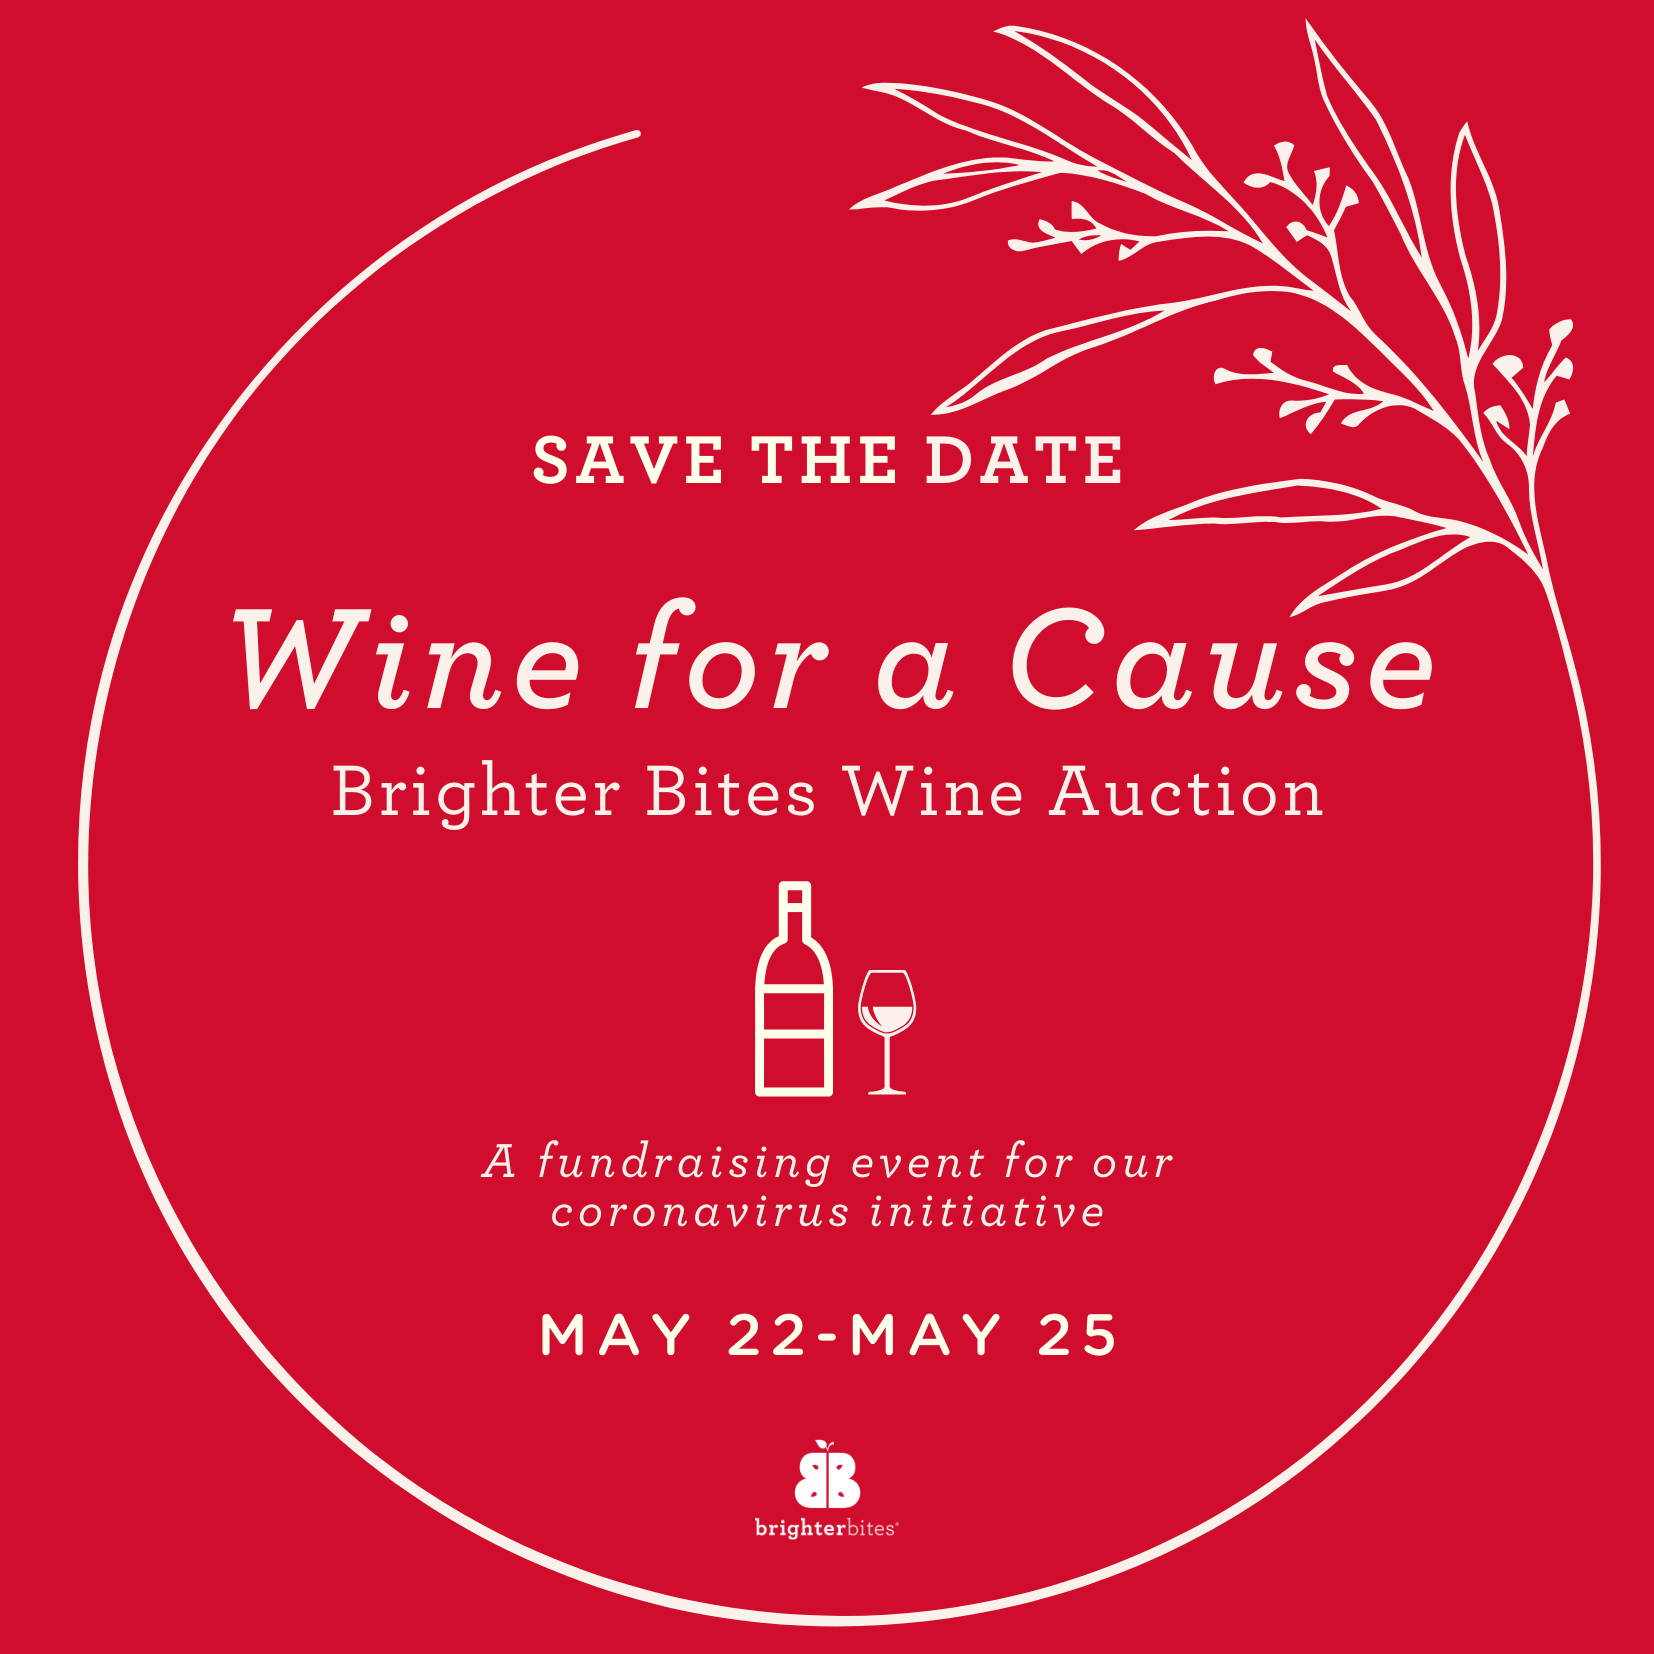 Save the date for Wine for a Cause